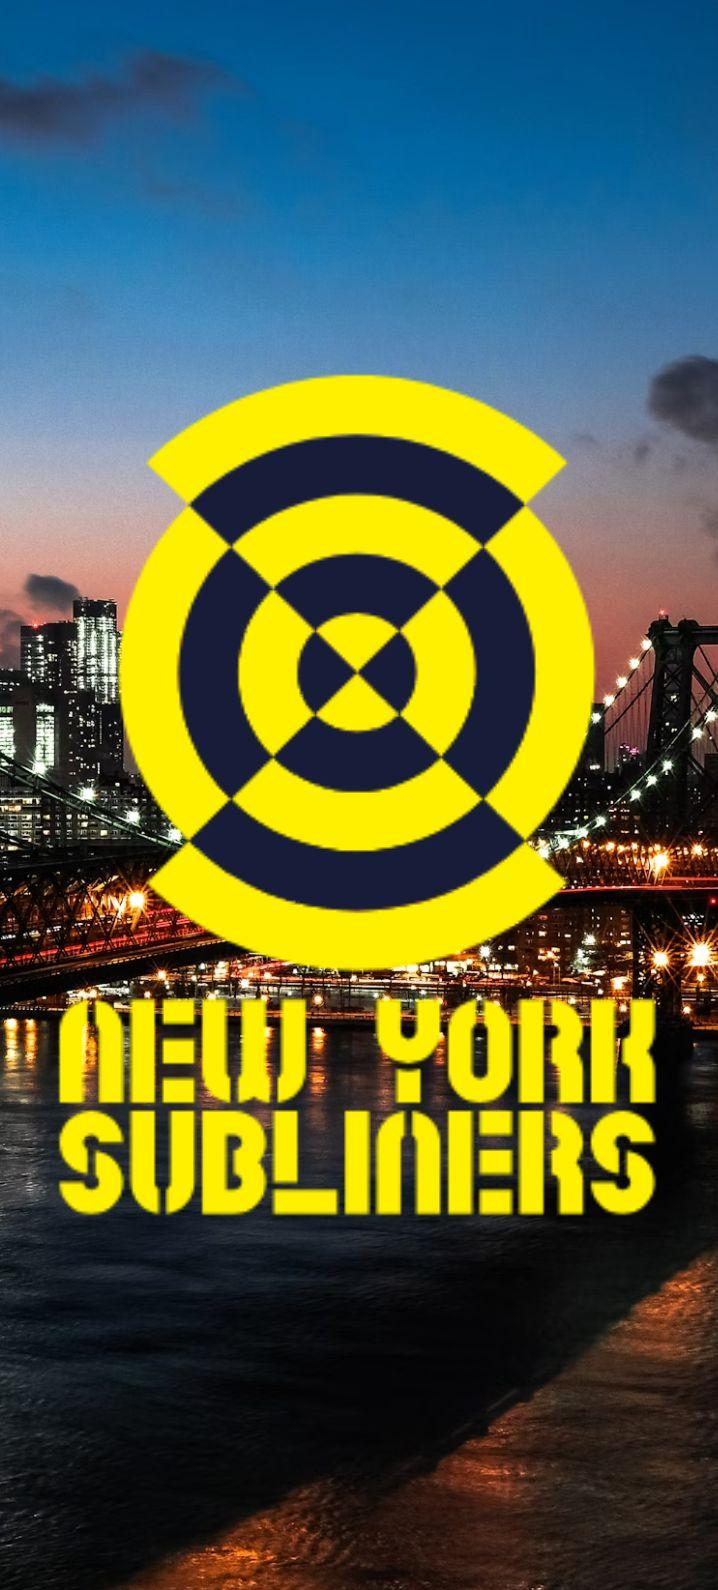 New York Subliners blue logo on yellow background